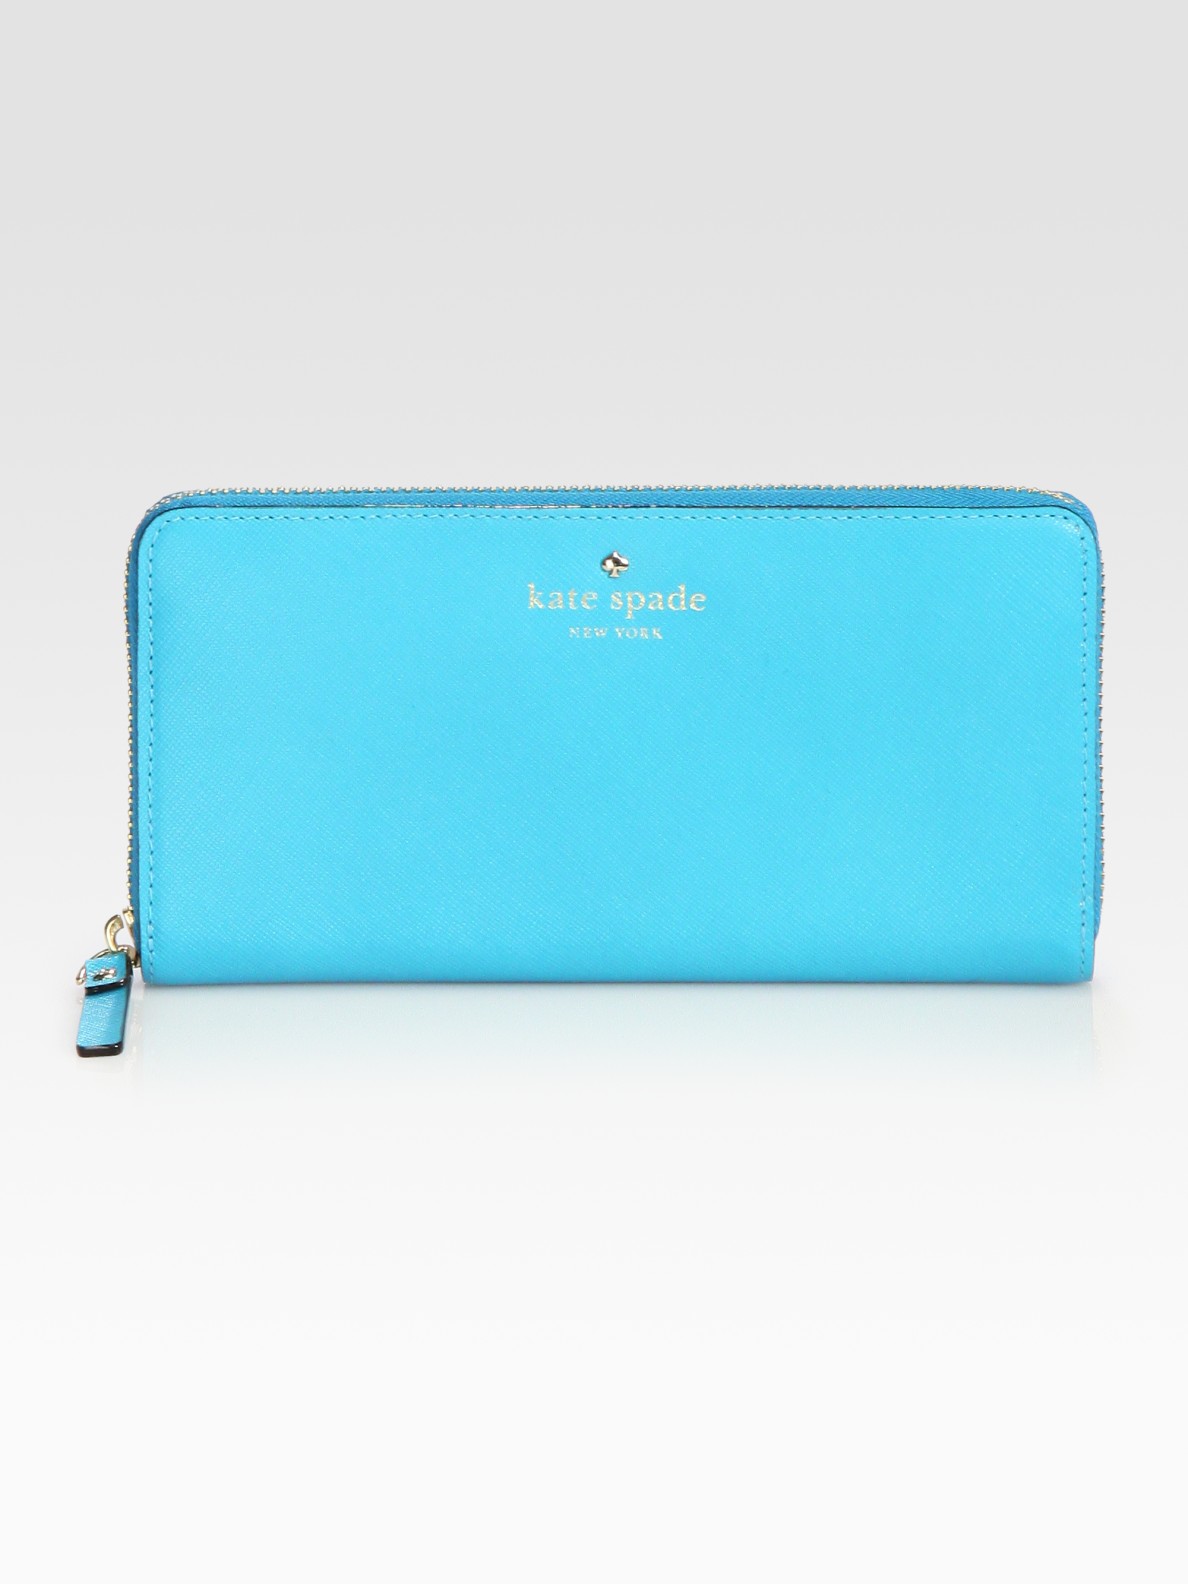 Kate Spade Saffiano Leather Ziparound Wallet in Blue (adriatic) | Lyst